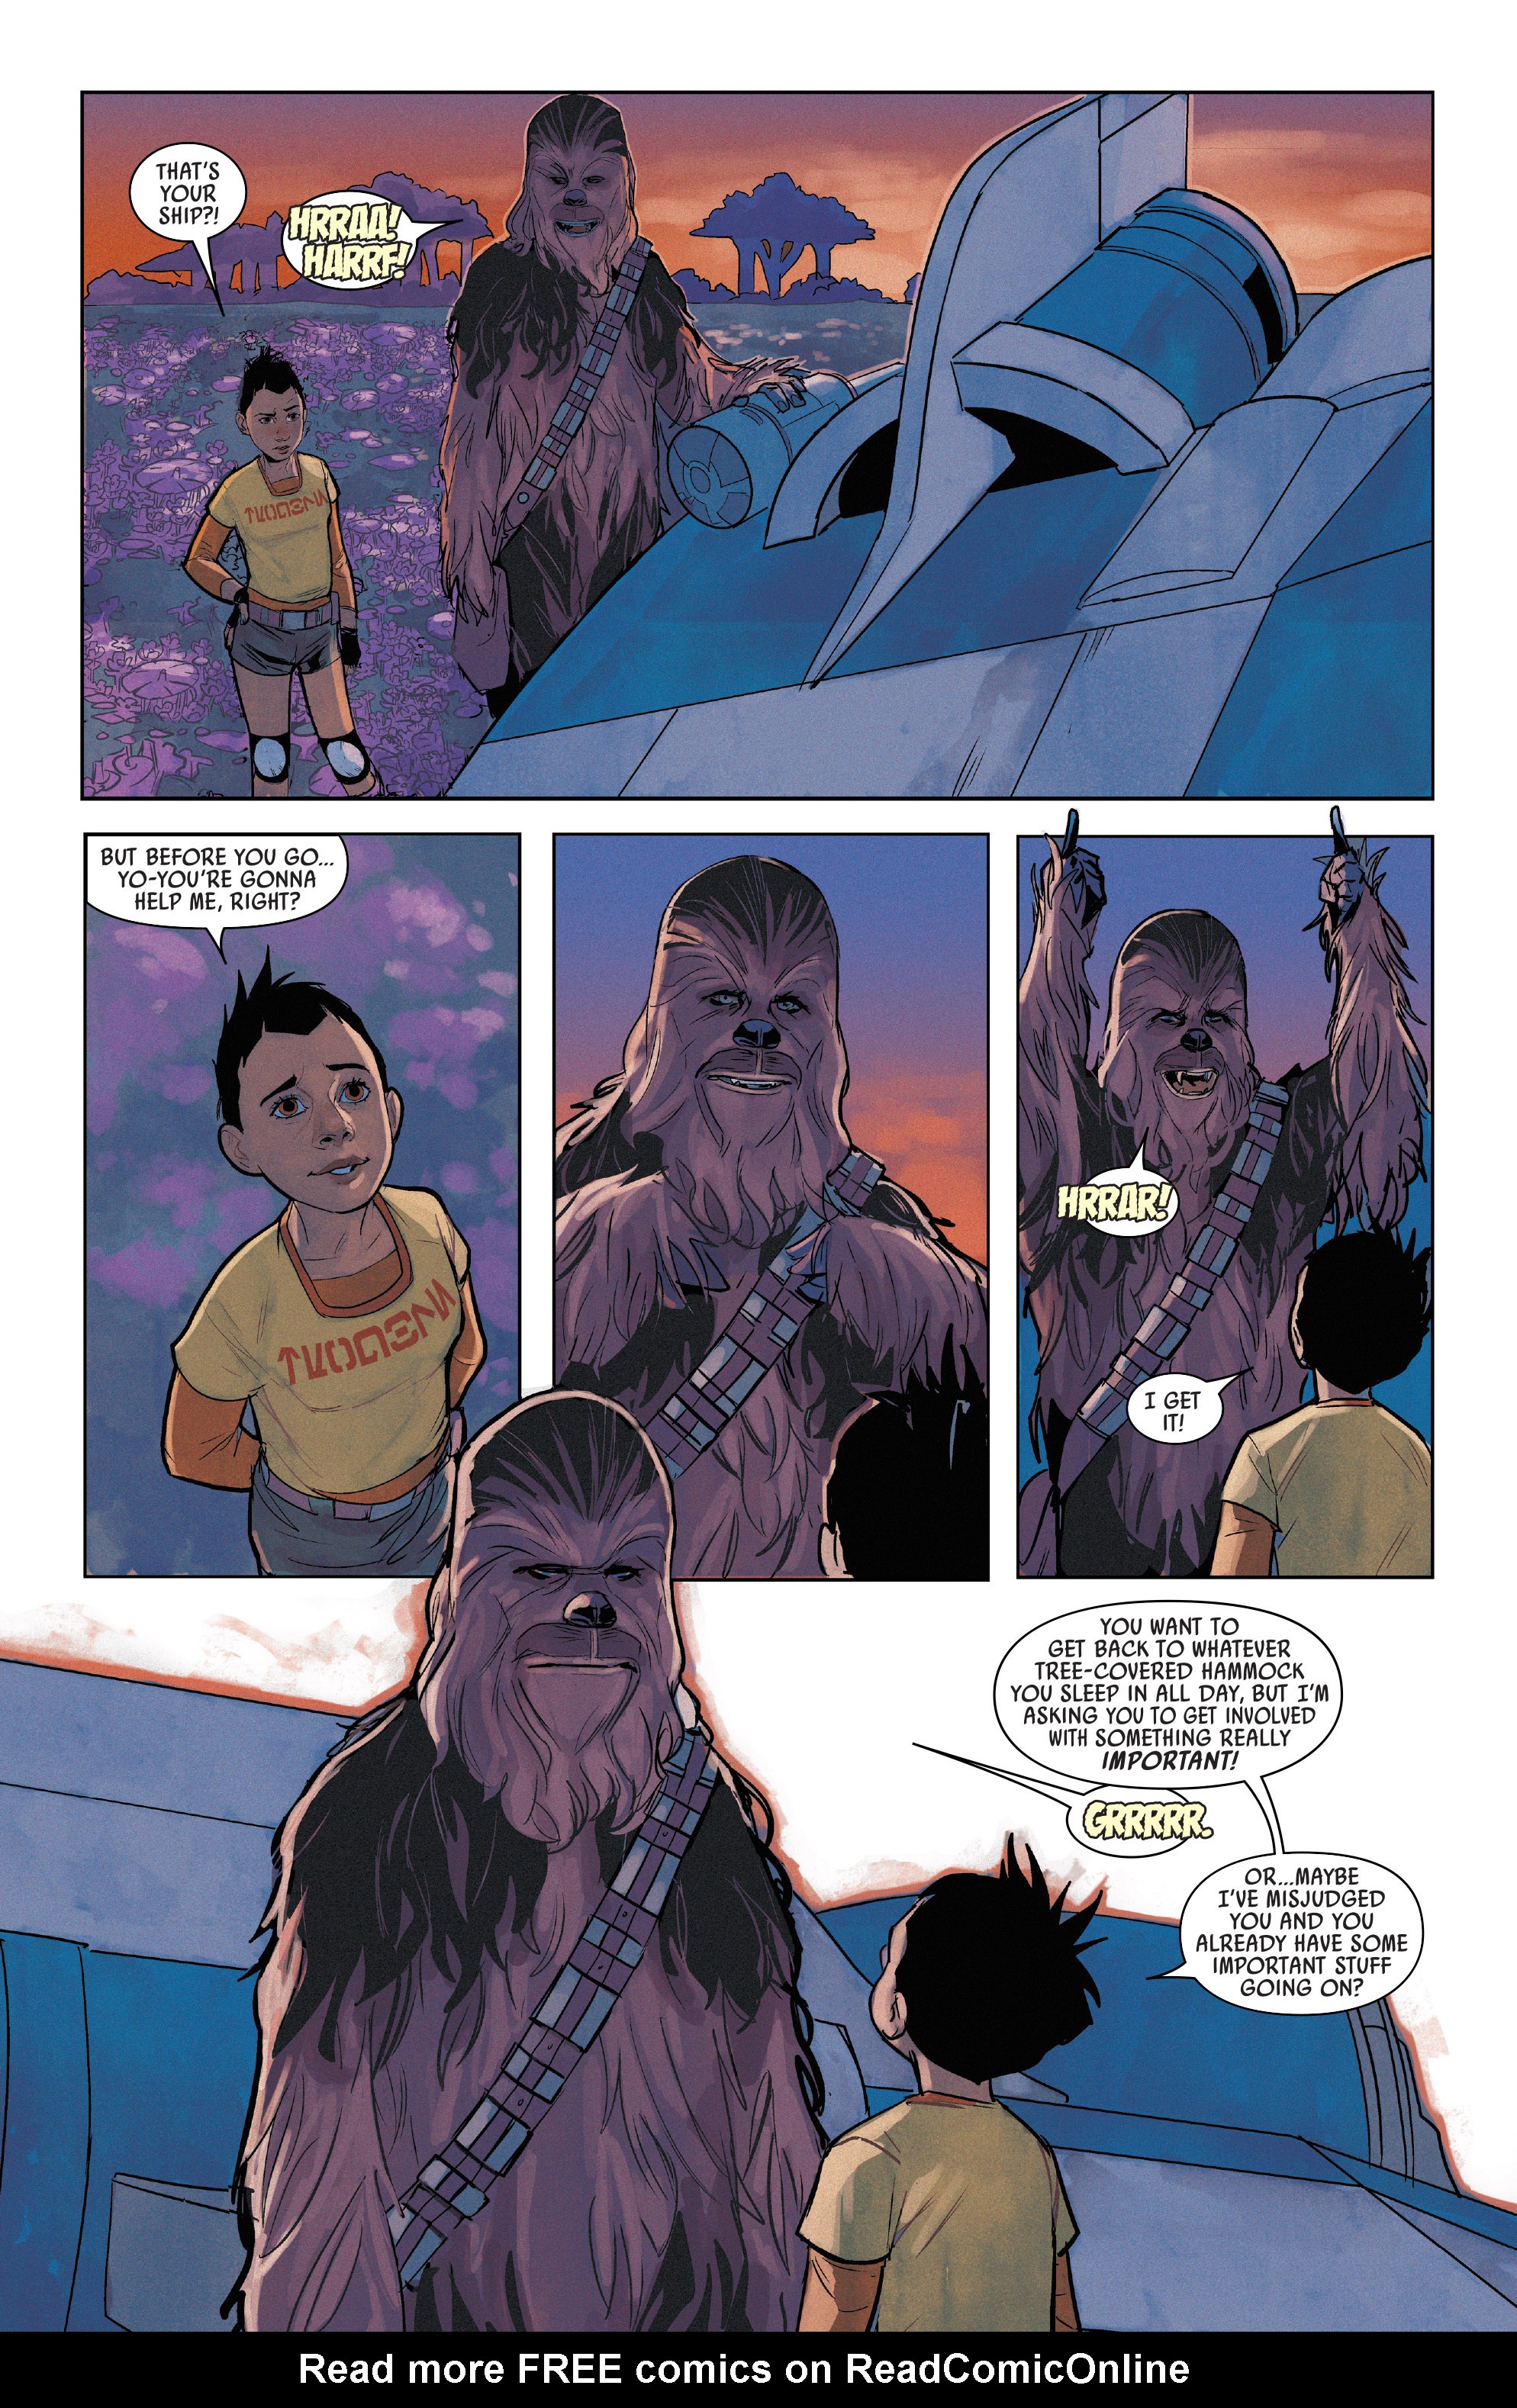 Read online Chewbacca comic -  Issue #1 - 18